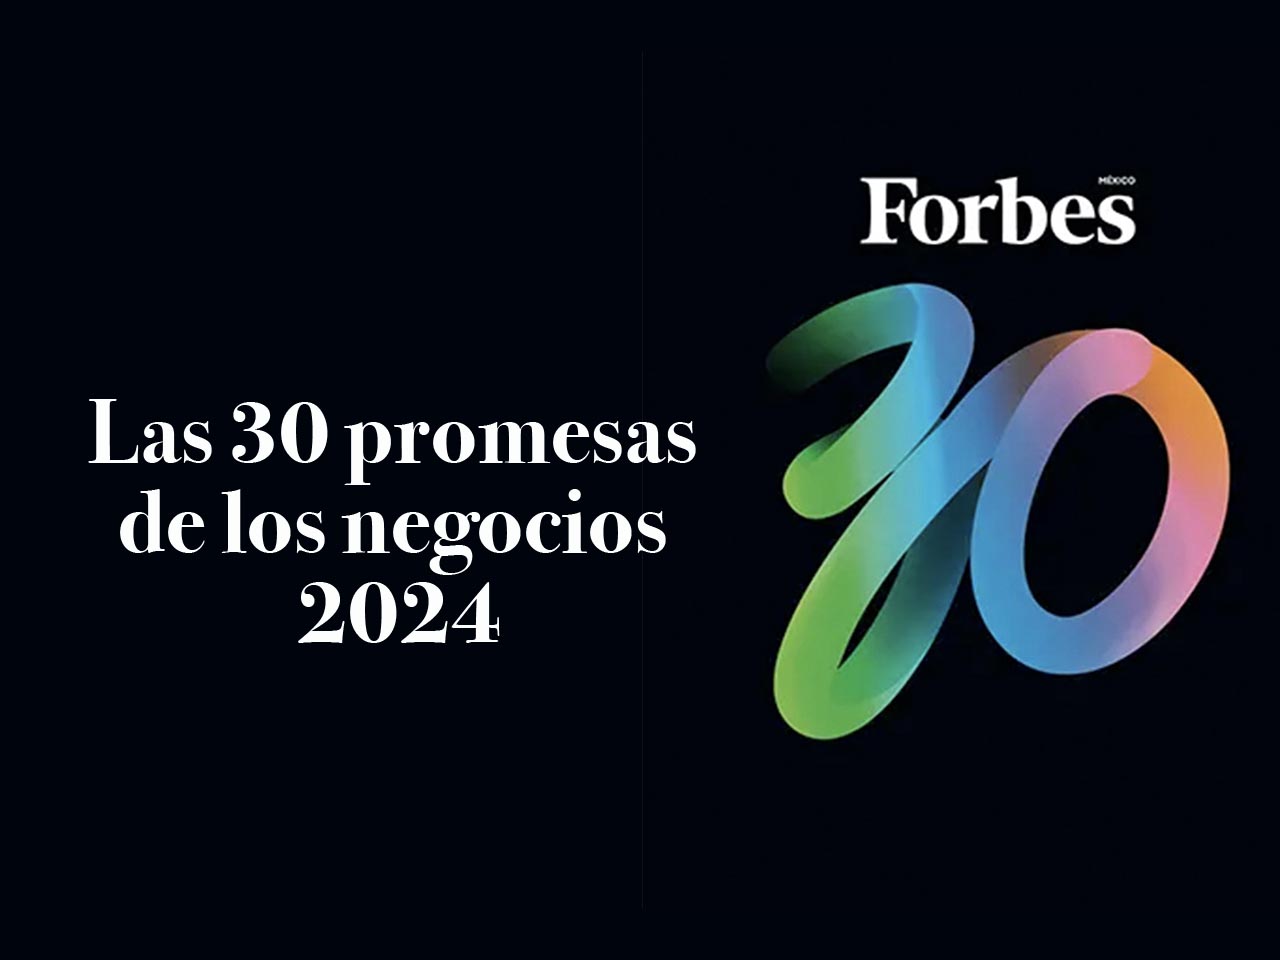 ITAM Alumni are part of Forbes Mexico 30 promises of business for 2024